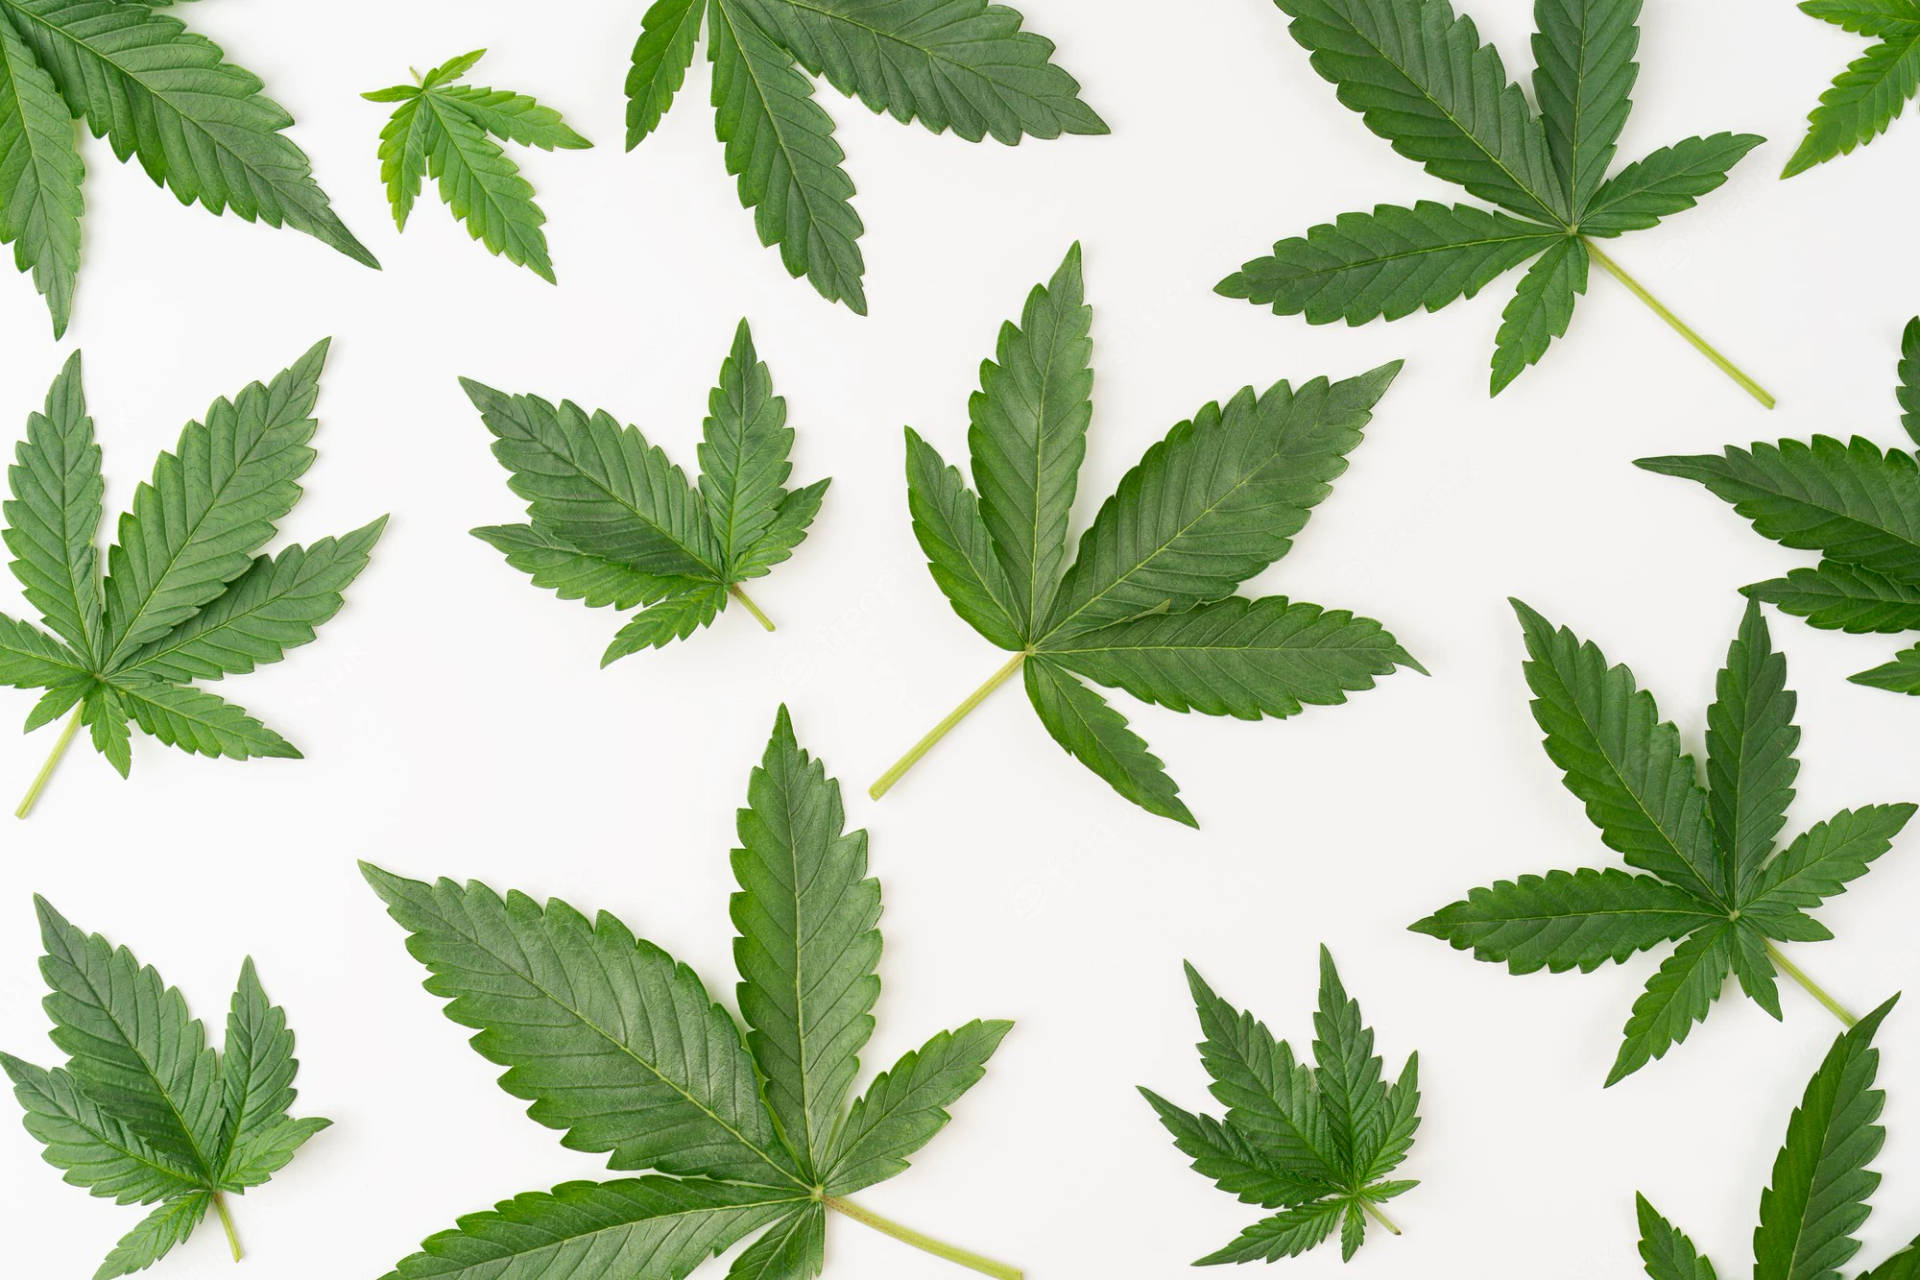 Cool Weed Leaves Flat-lay